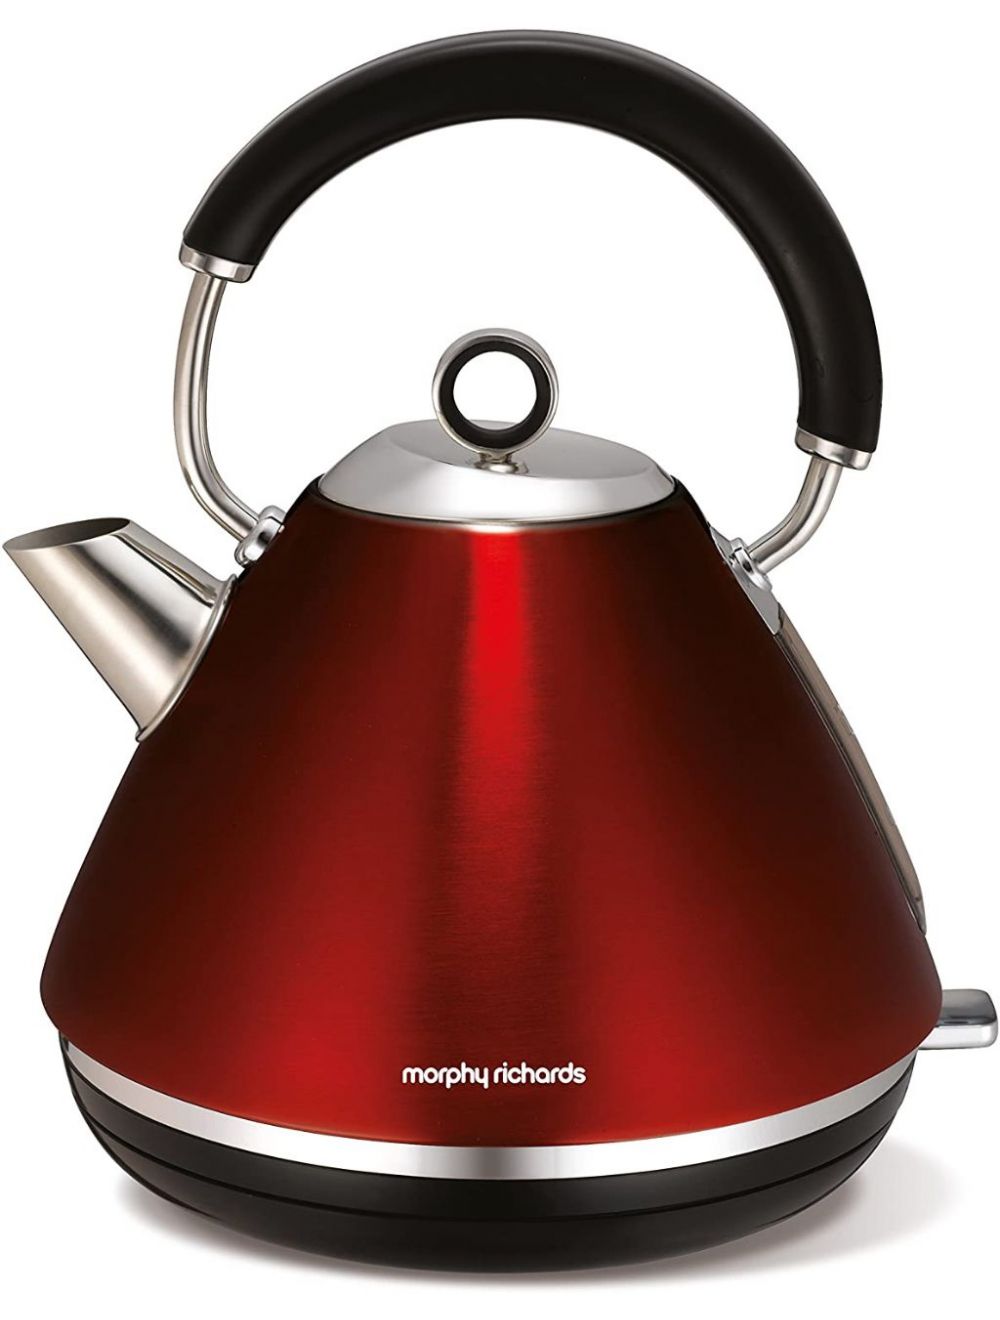 Morphy Richards Accents Pyramid Kettle, 1.5 L - Red-102004